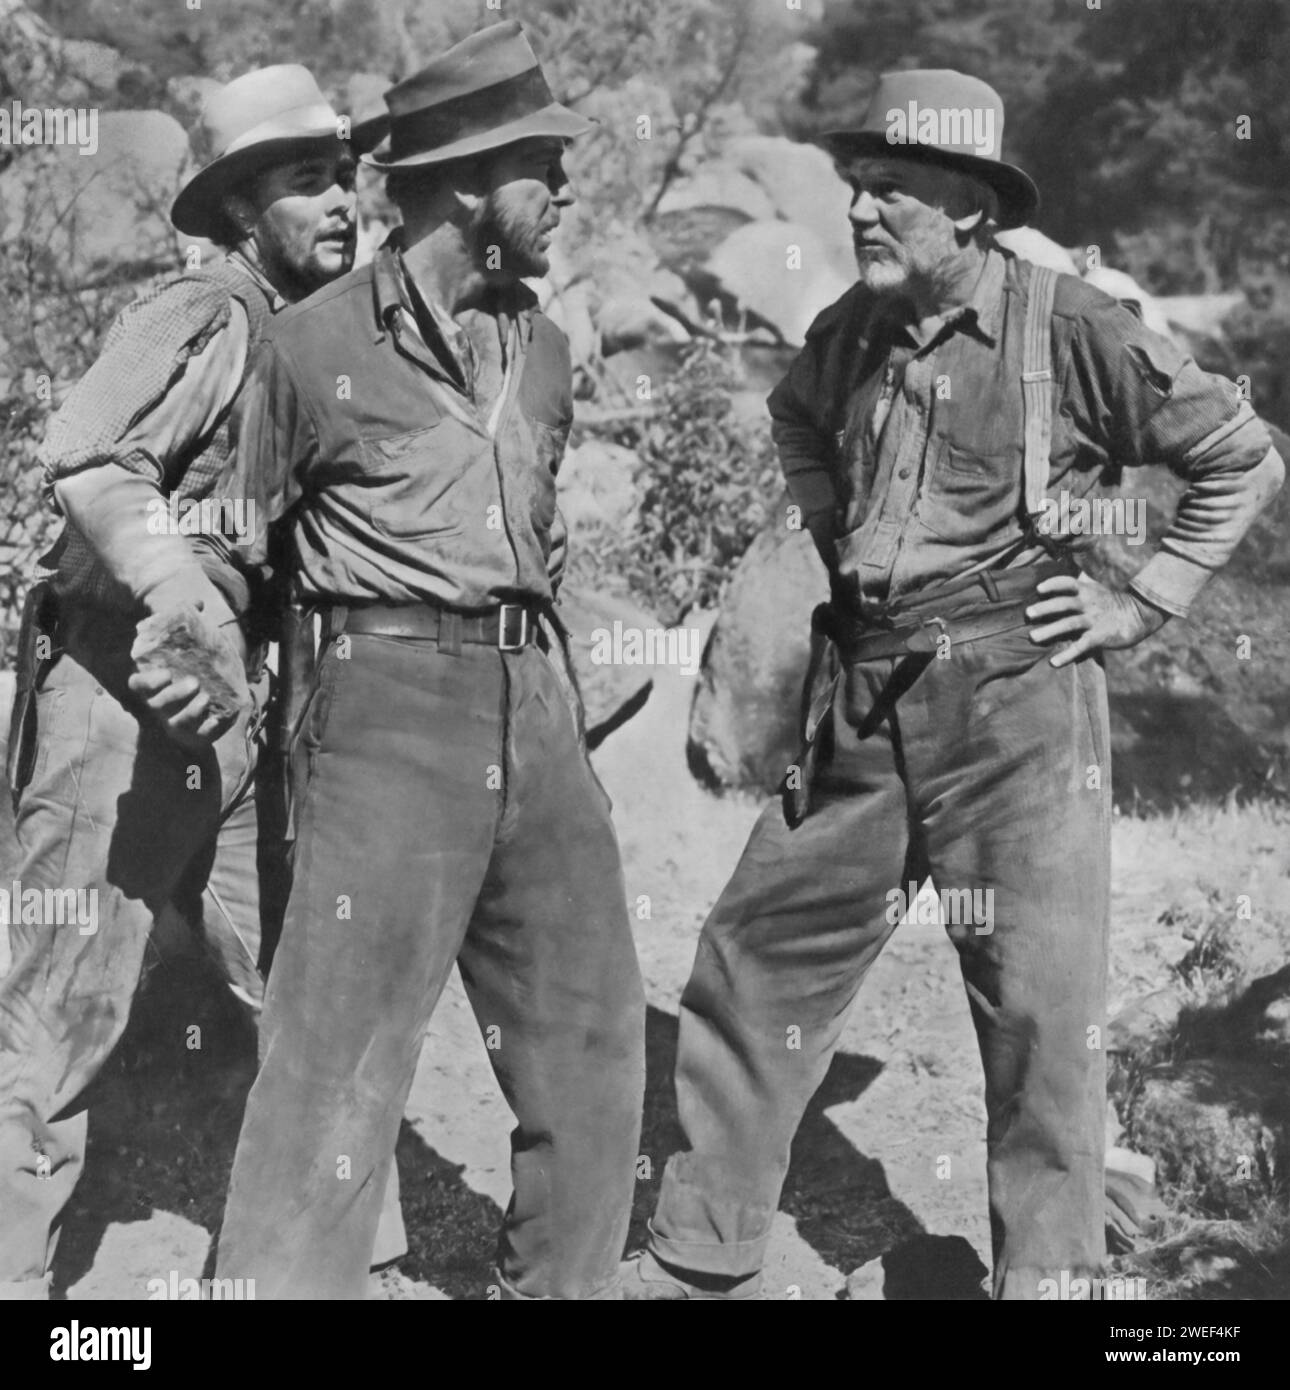 Tim Holt, Humphrey Bogart, and Walter Huston star in 'The Treasure of the Sierra Madre' (1948). In this iconic adventure drama, Bogart portrays Fred C. Dobbs, a down-and-out American in Mexico, while Holt plays his young companion, Bob Curtin. Walter Huston delivers a standout performance as Howard, the seasoned prospector guiding their quest for gold in the Sierra Madre mountains. Their journey, marked by the challenges of nature and the growing greed among them. Stock Photo